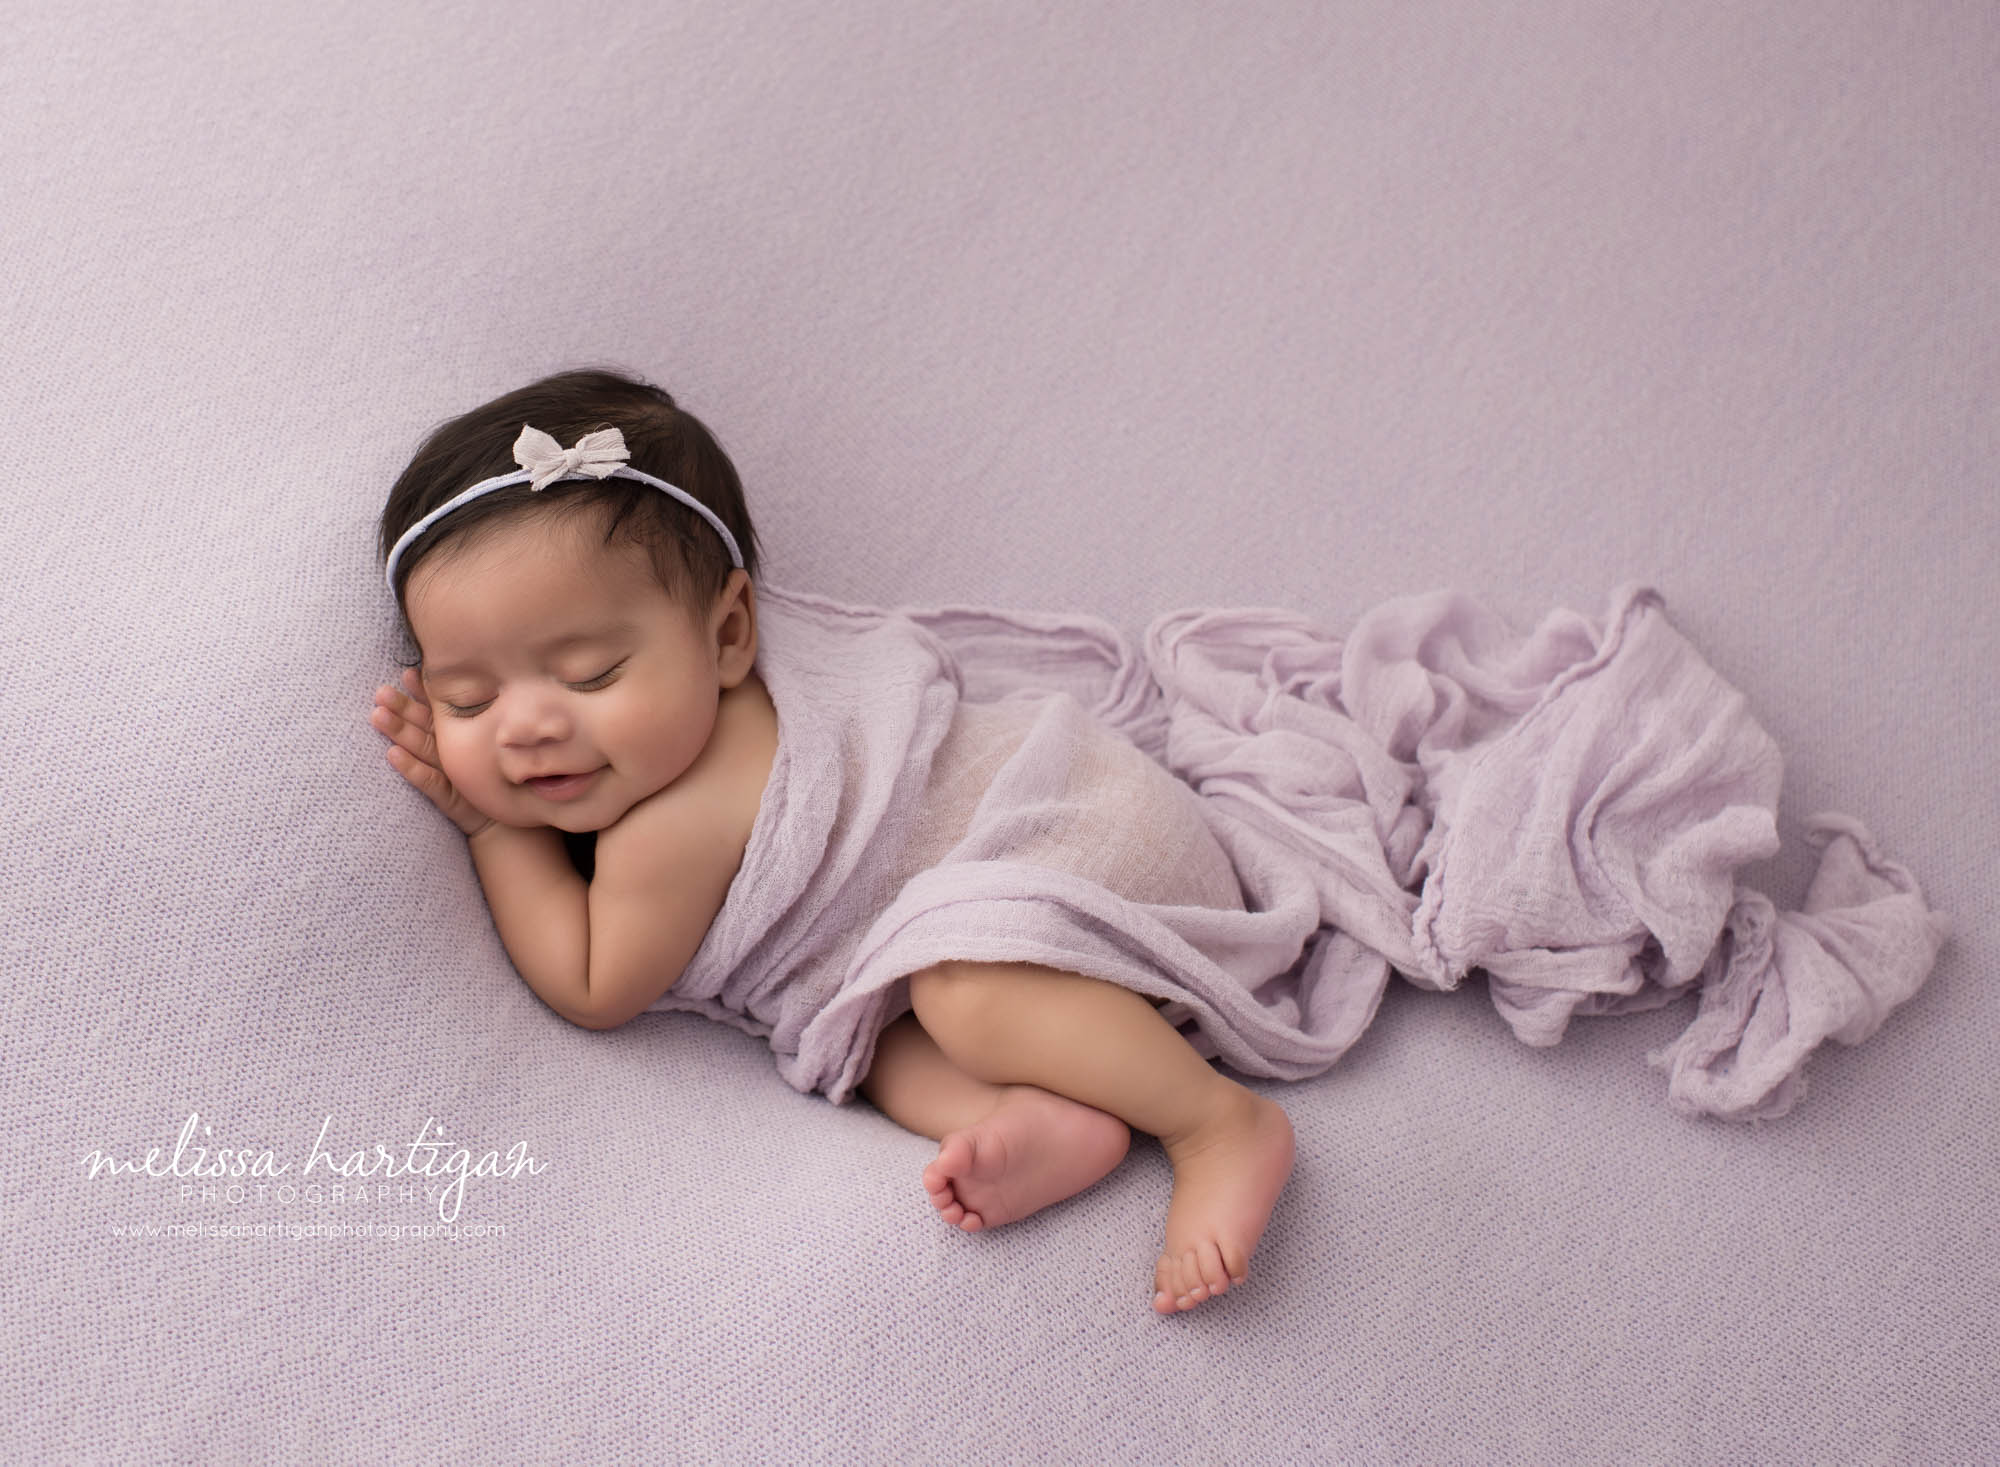 newborn baby girl posed on side sleeping smiling happy lavendar colored backdrop and wrap